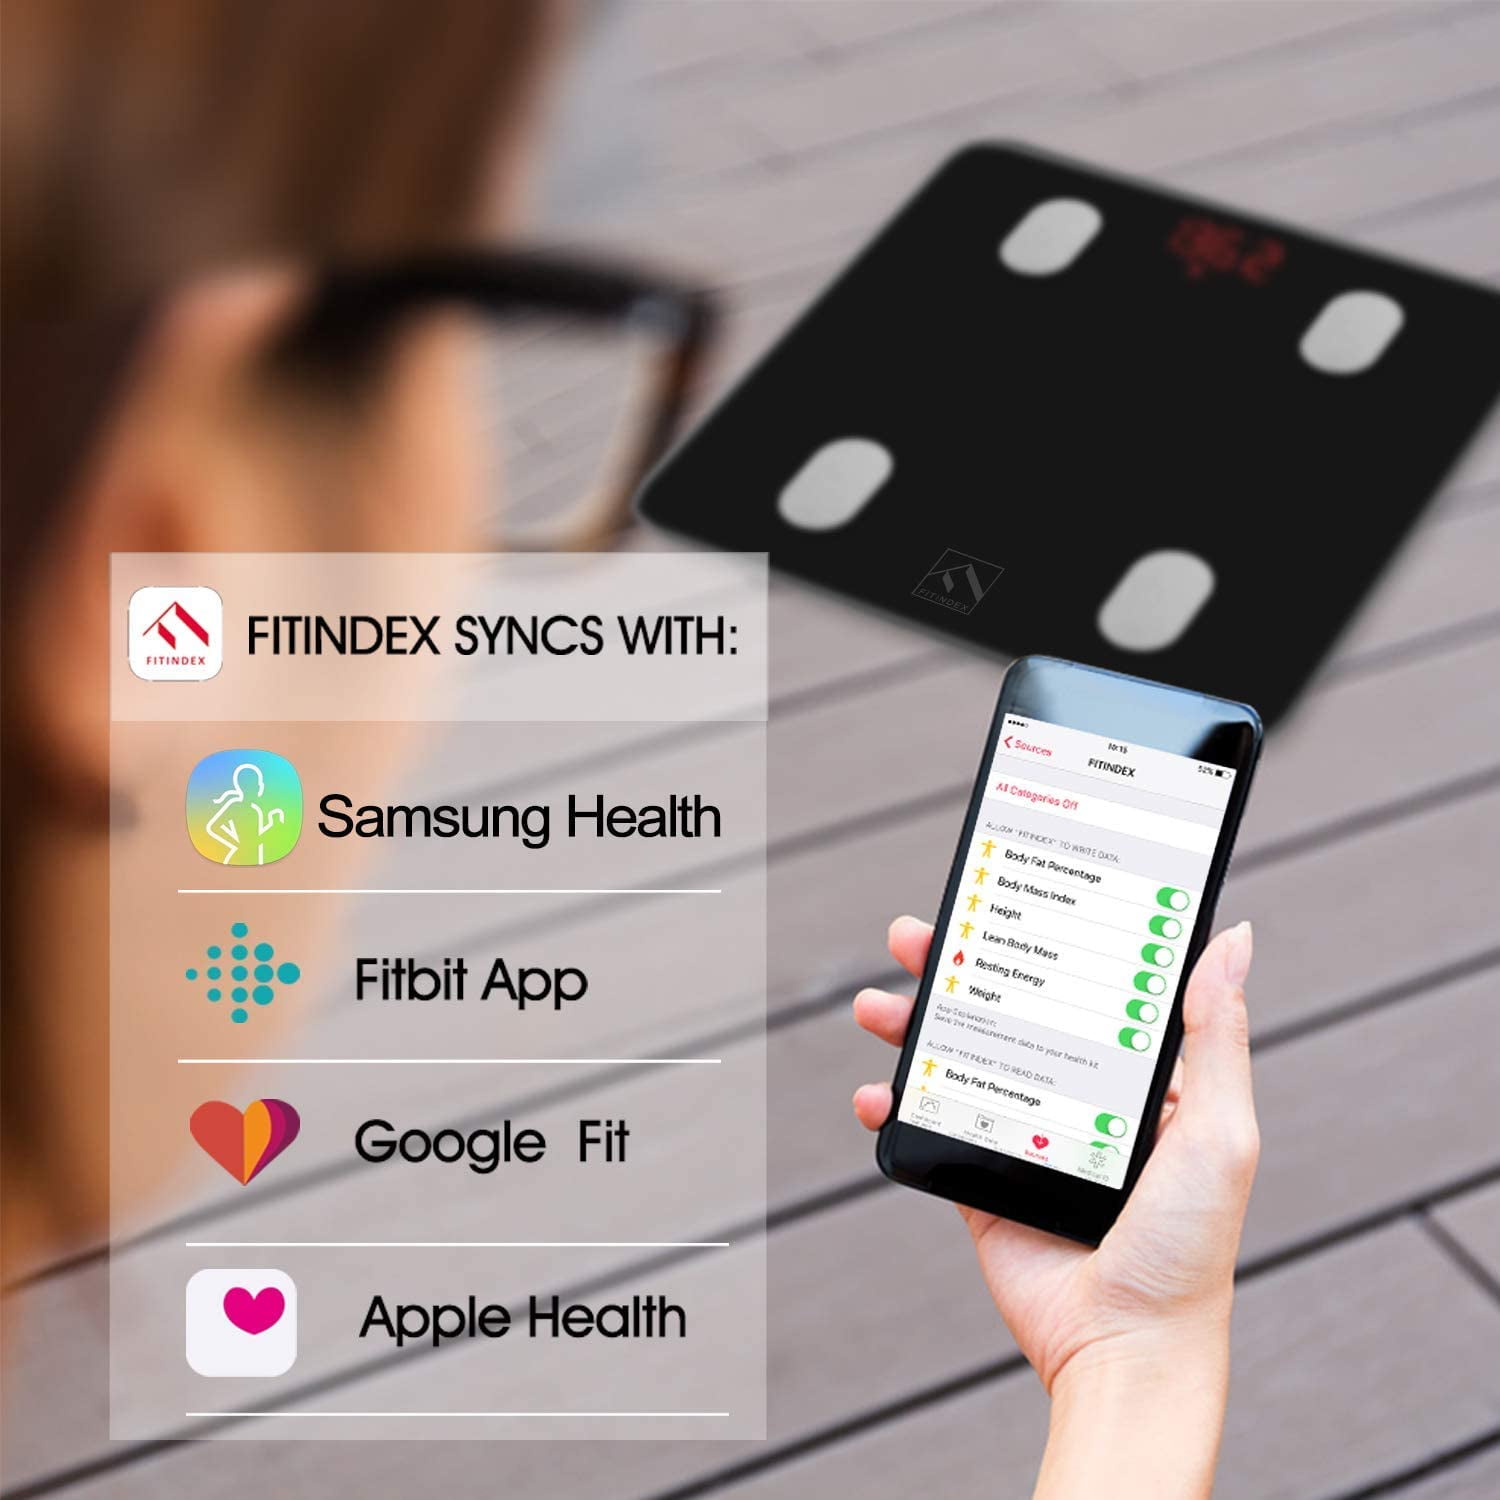  FITINDEX Smart Bluetooth Body Fat Scale with Upgraded